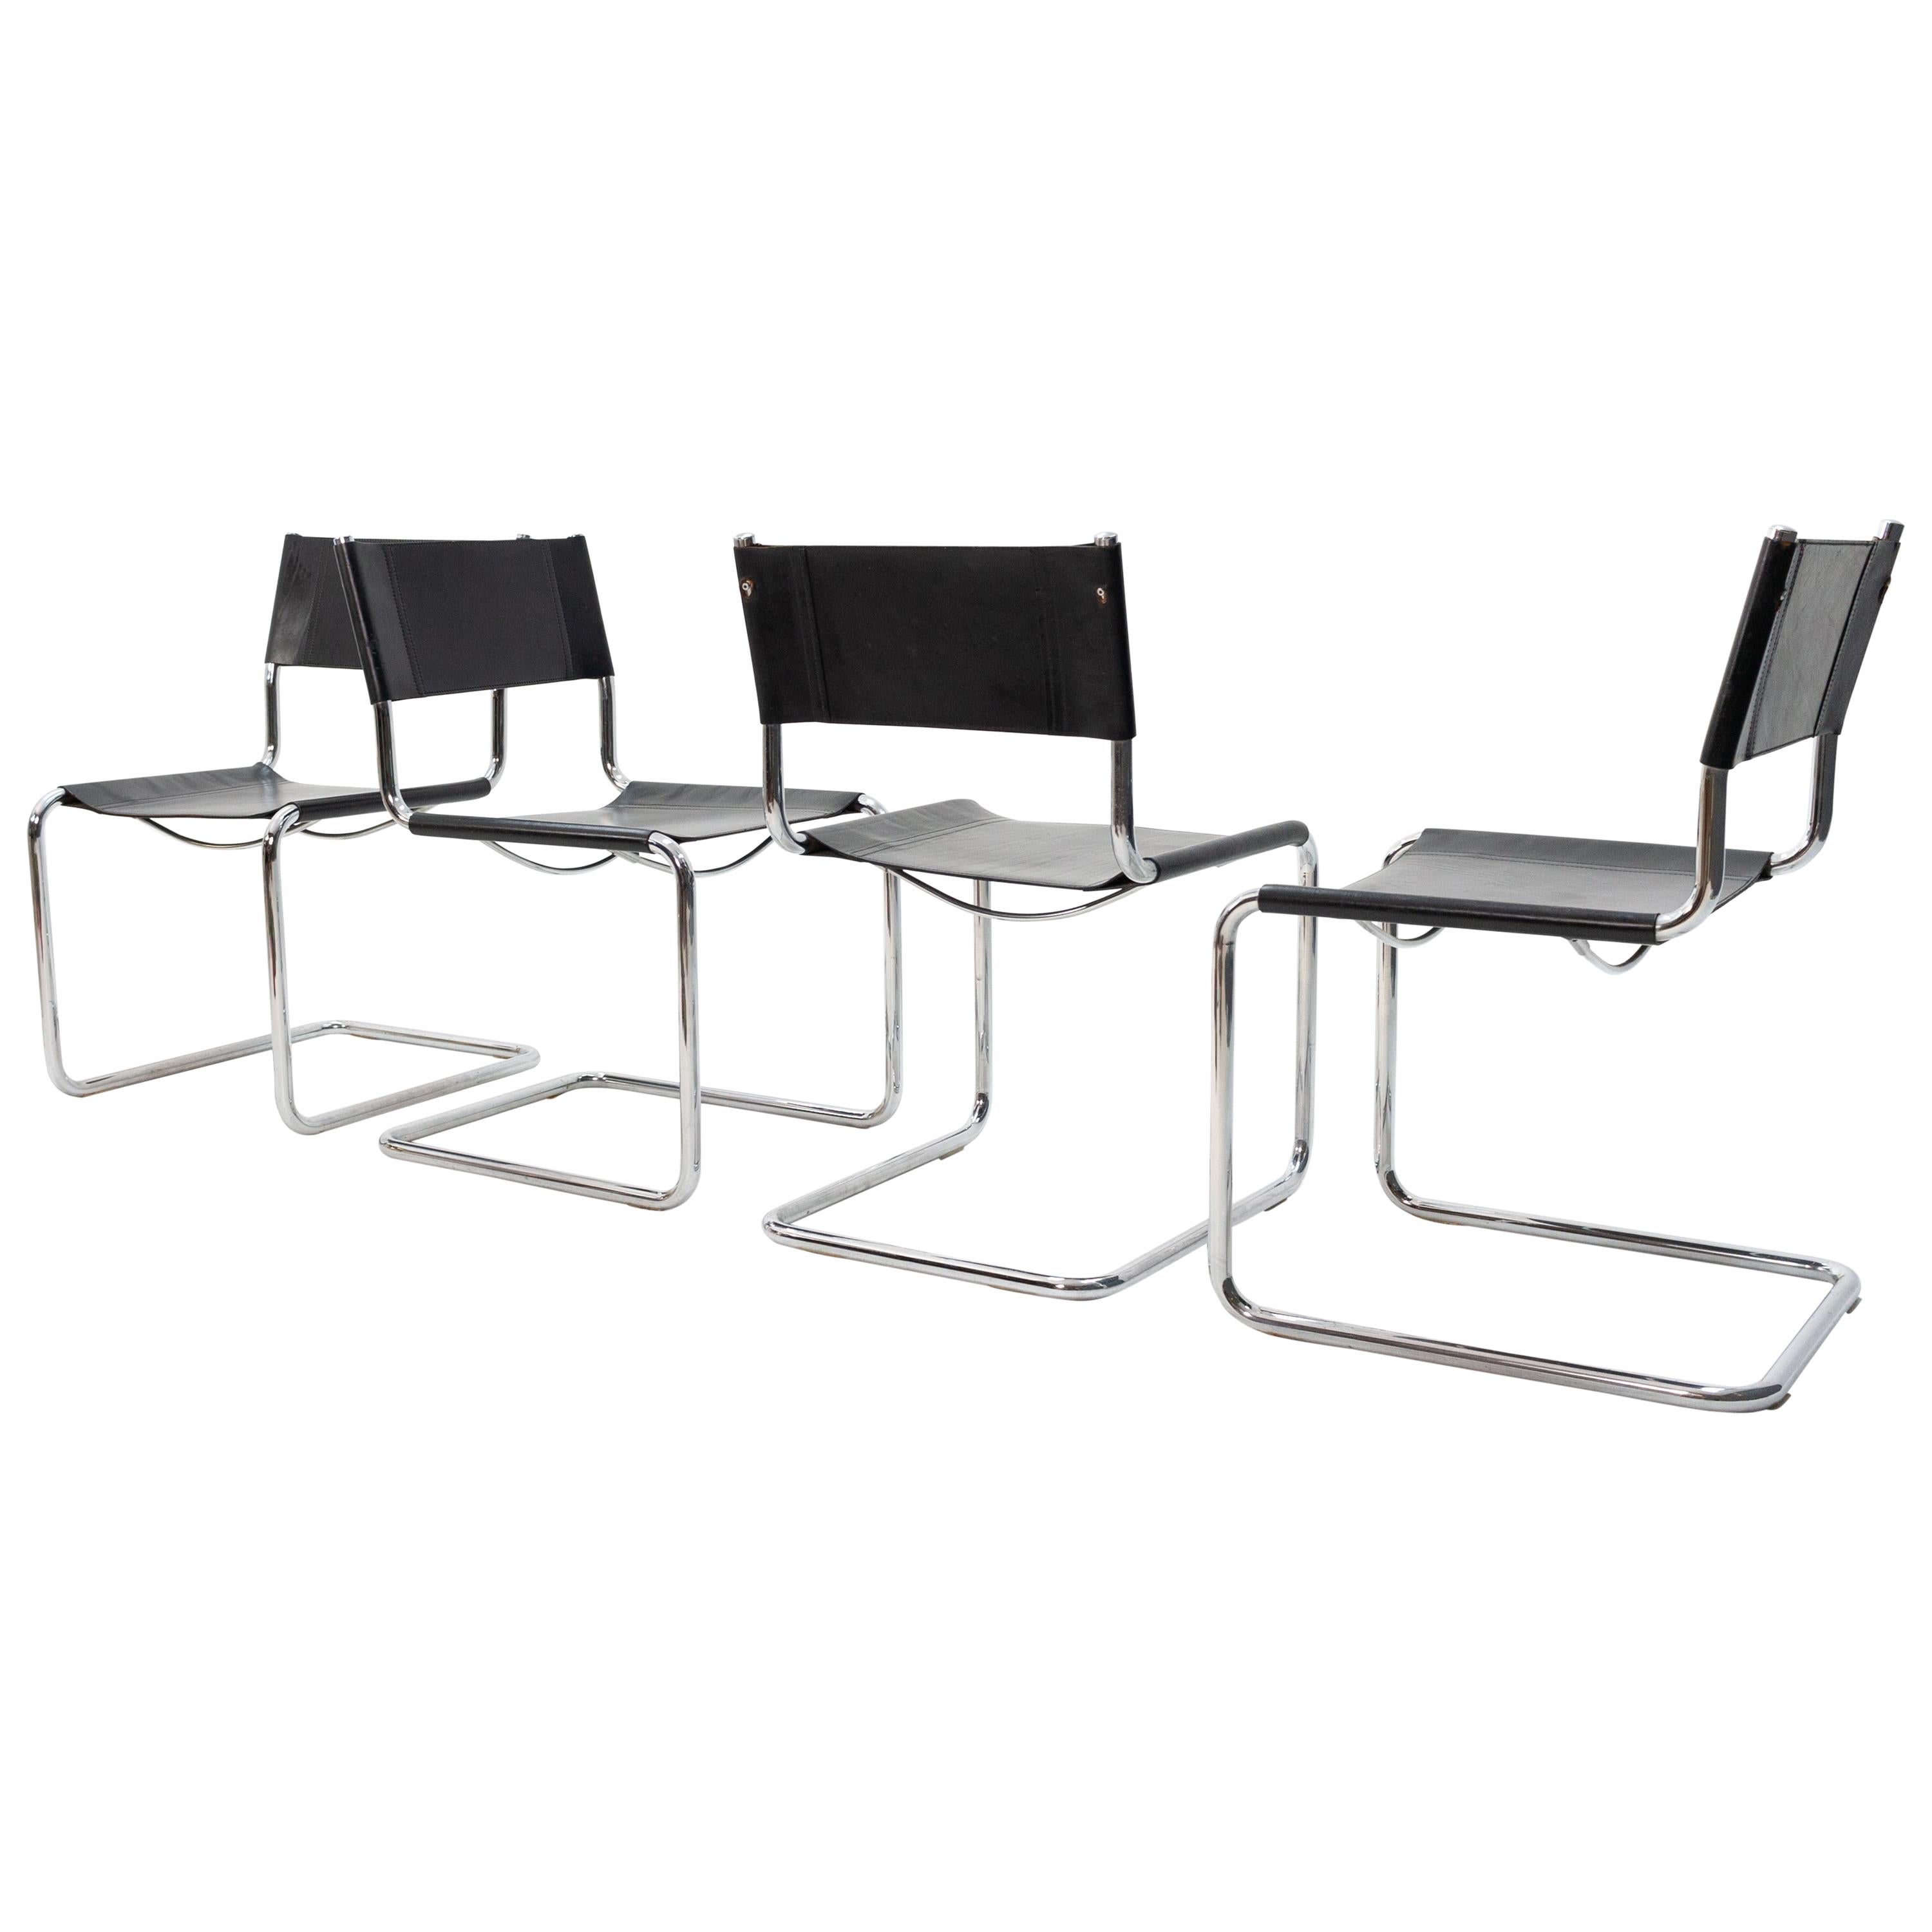 Bauhaus Linea Veam Cantilever Chairs